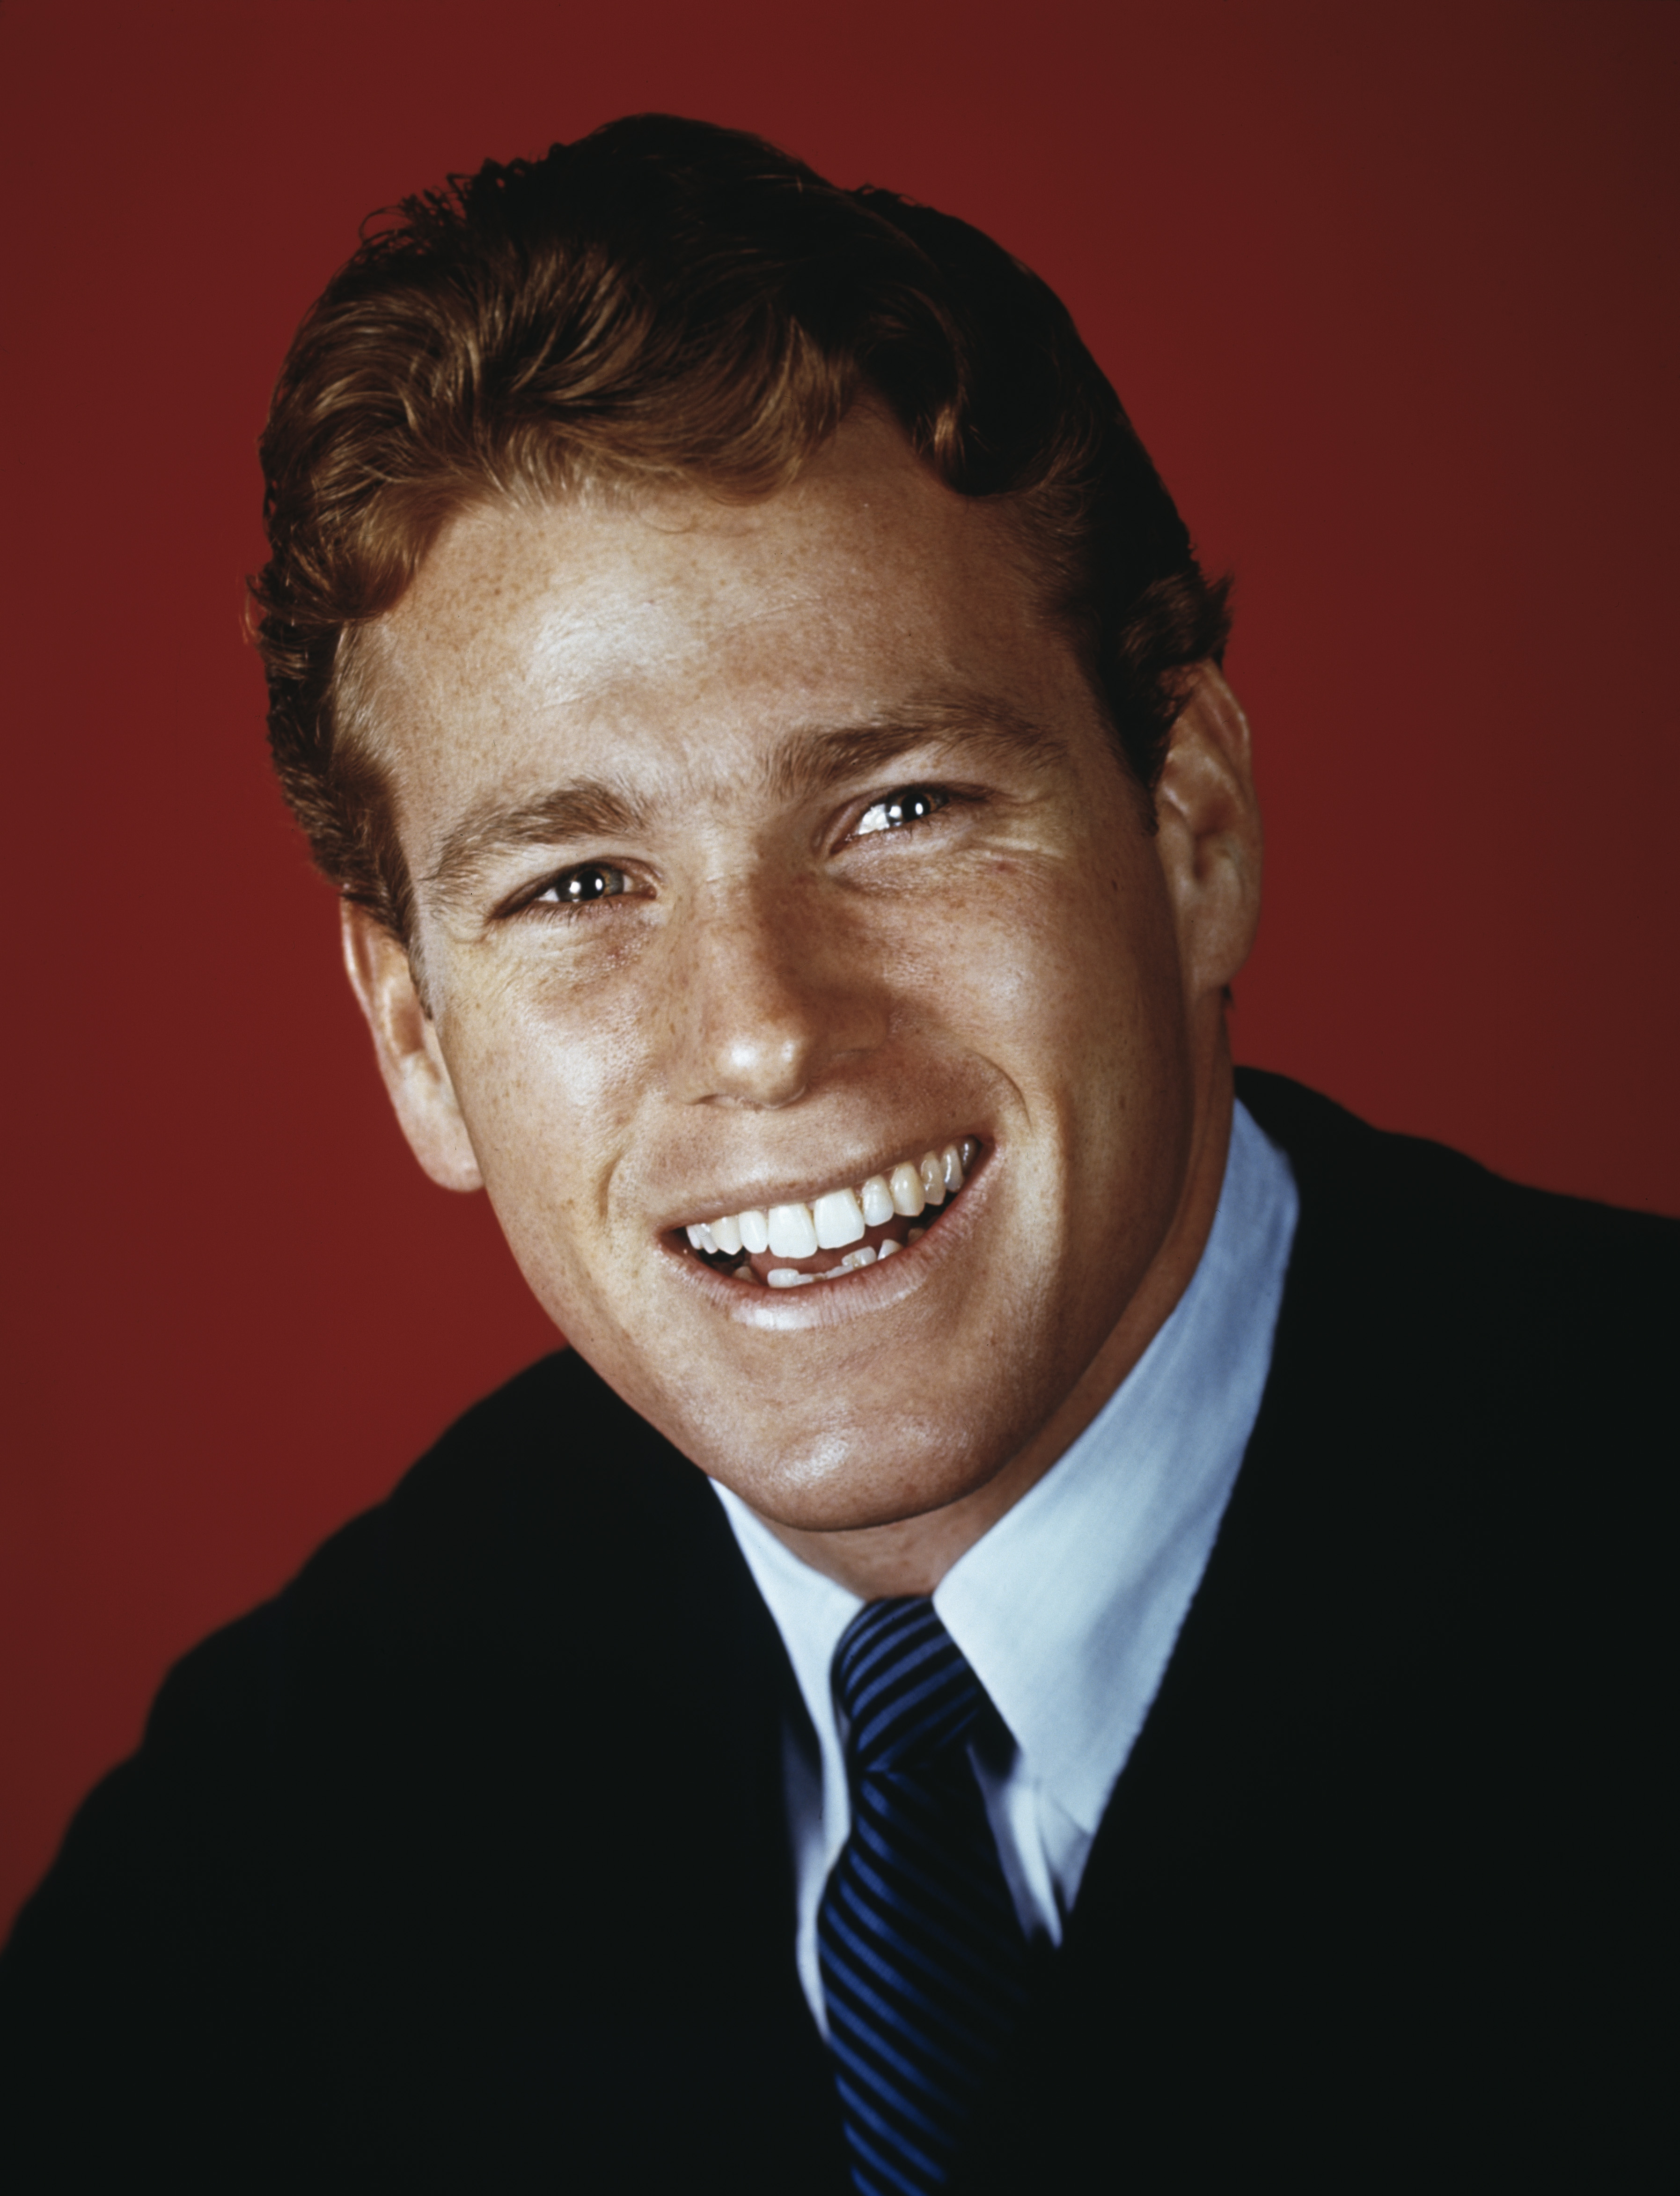 Ryan O'Neal photographed in 1965 | Source: Getty Images